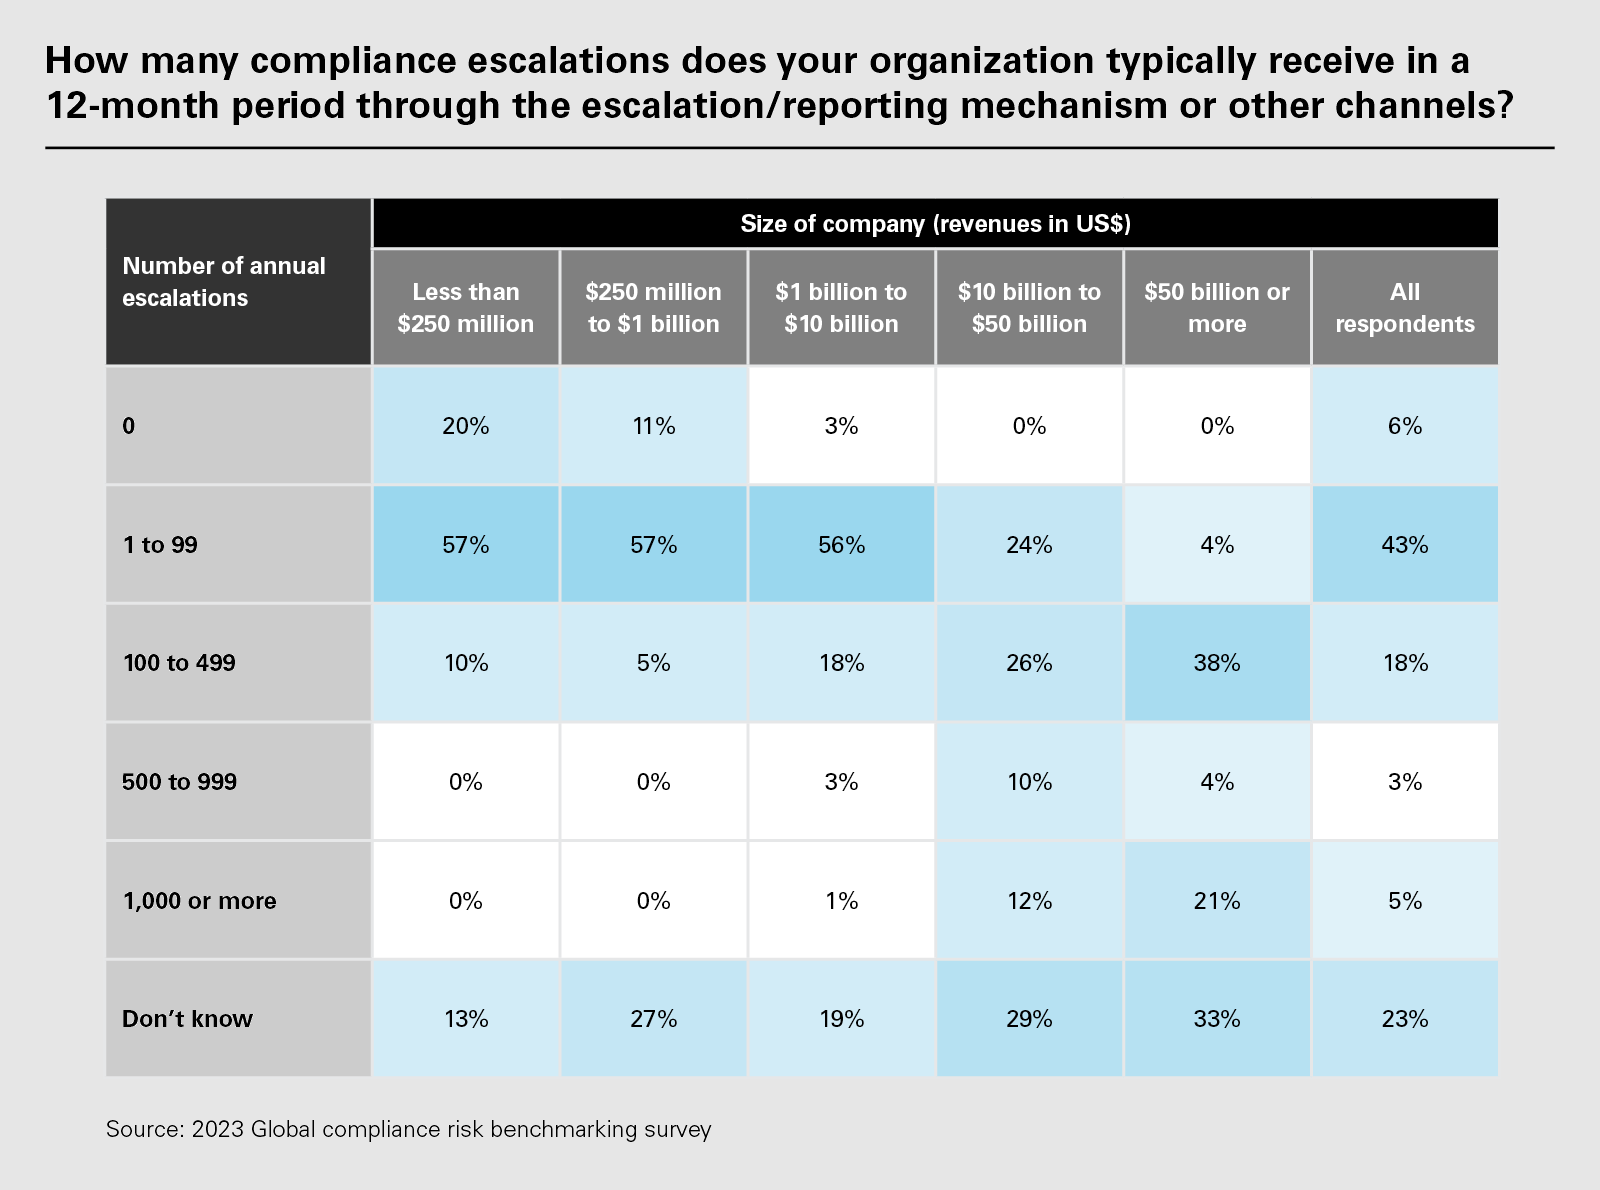 How many compliance escalations does your organization typically receive in a 12-month period through the escalation/reporting mechanism or other channels?